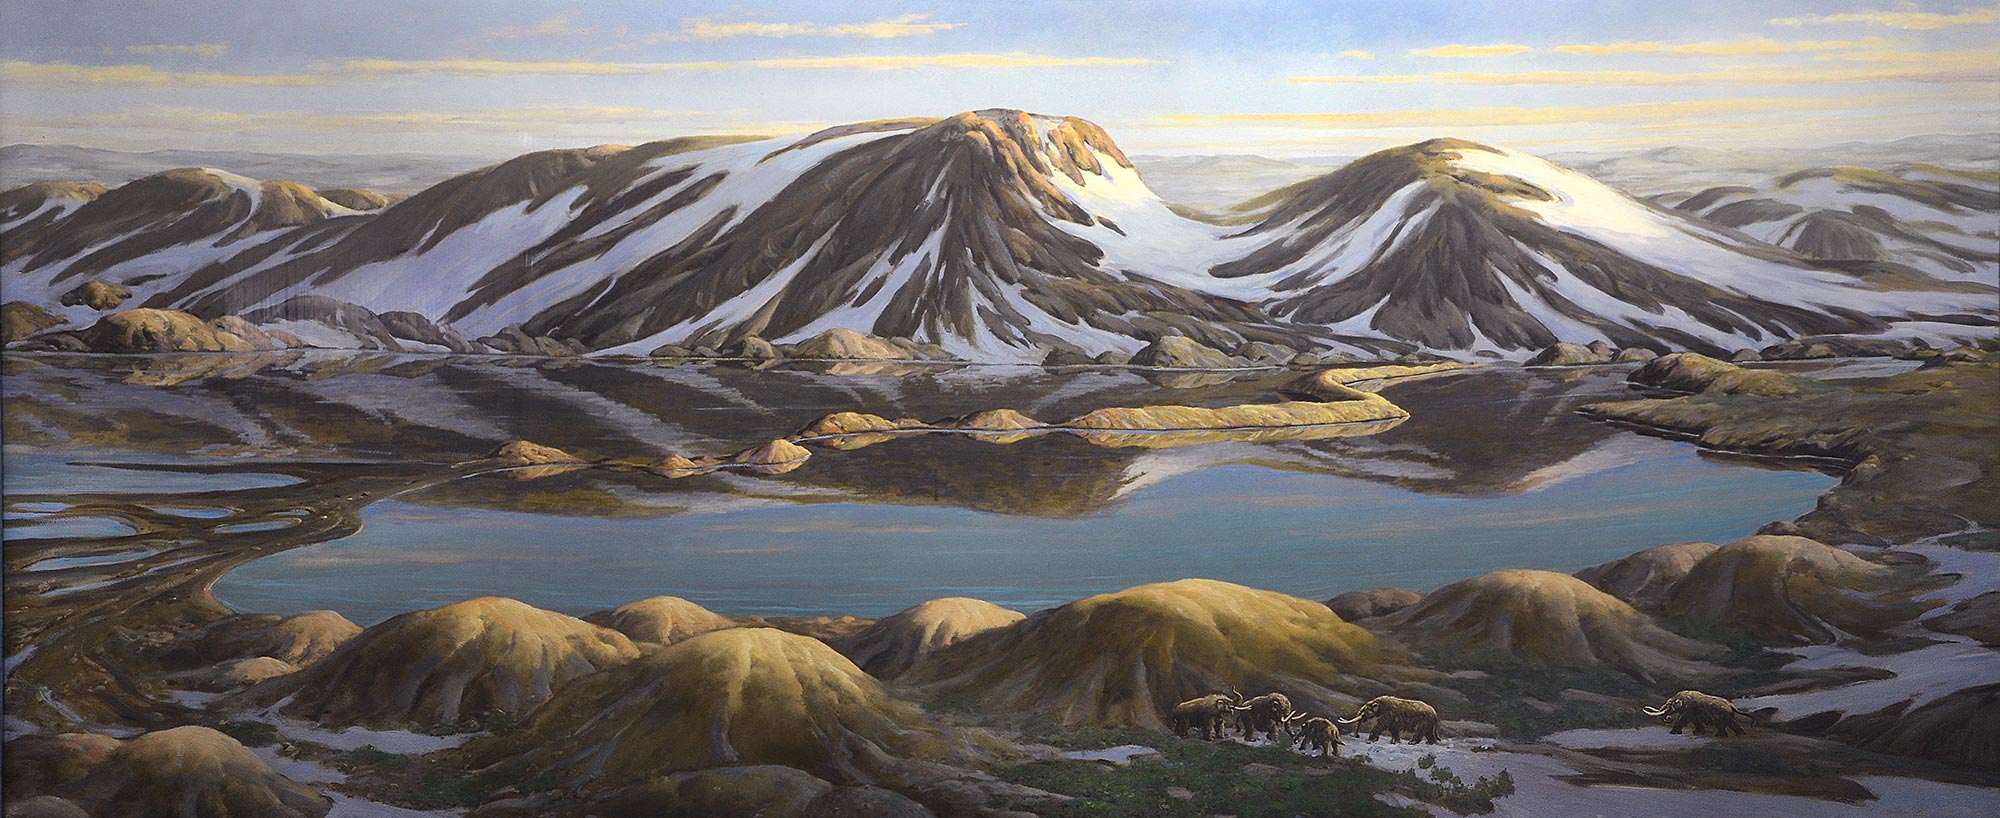 Painting of snowed mountains with lakes and a group of mammuts